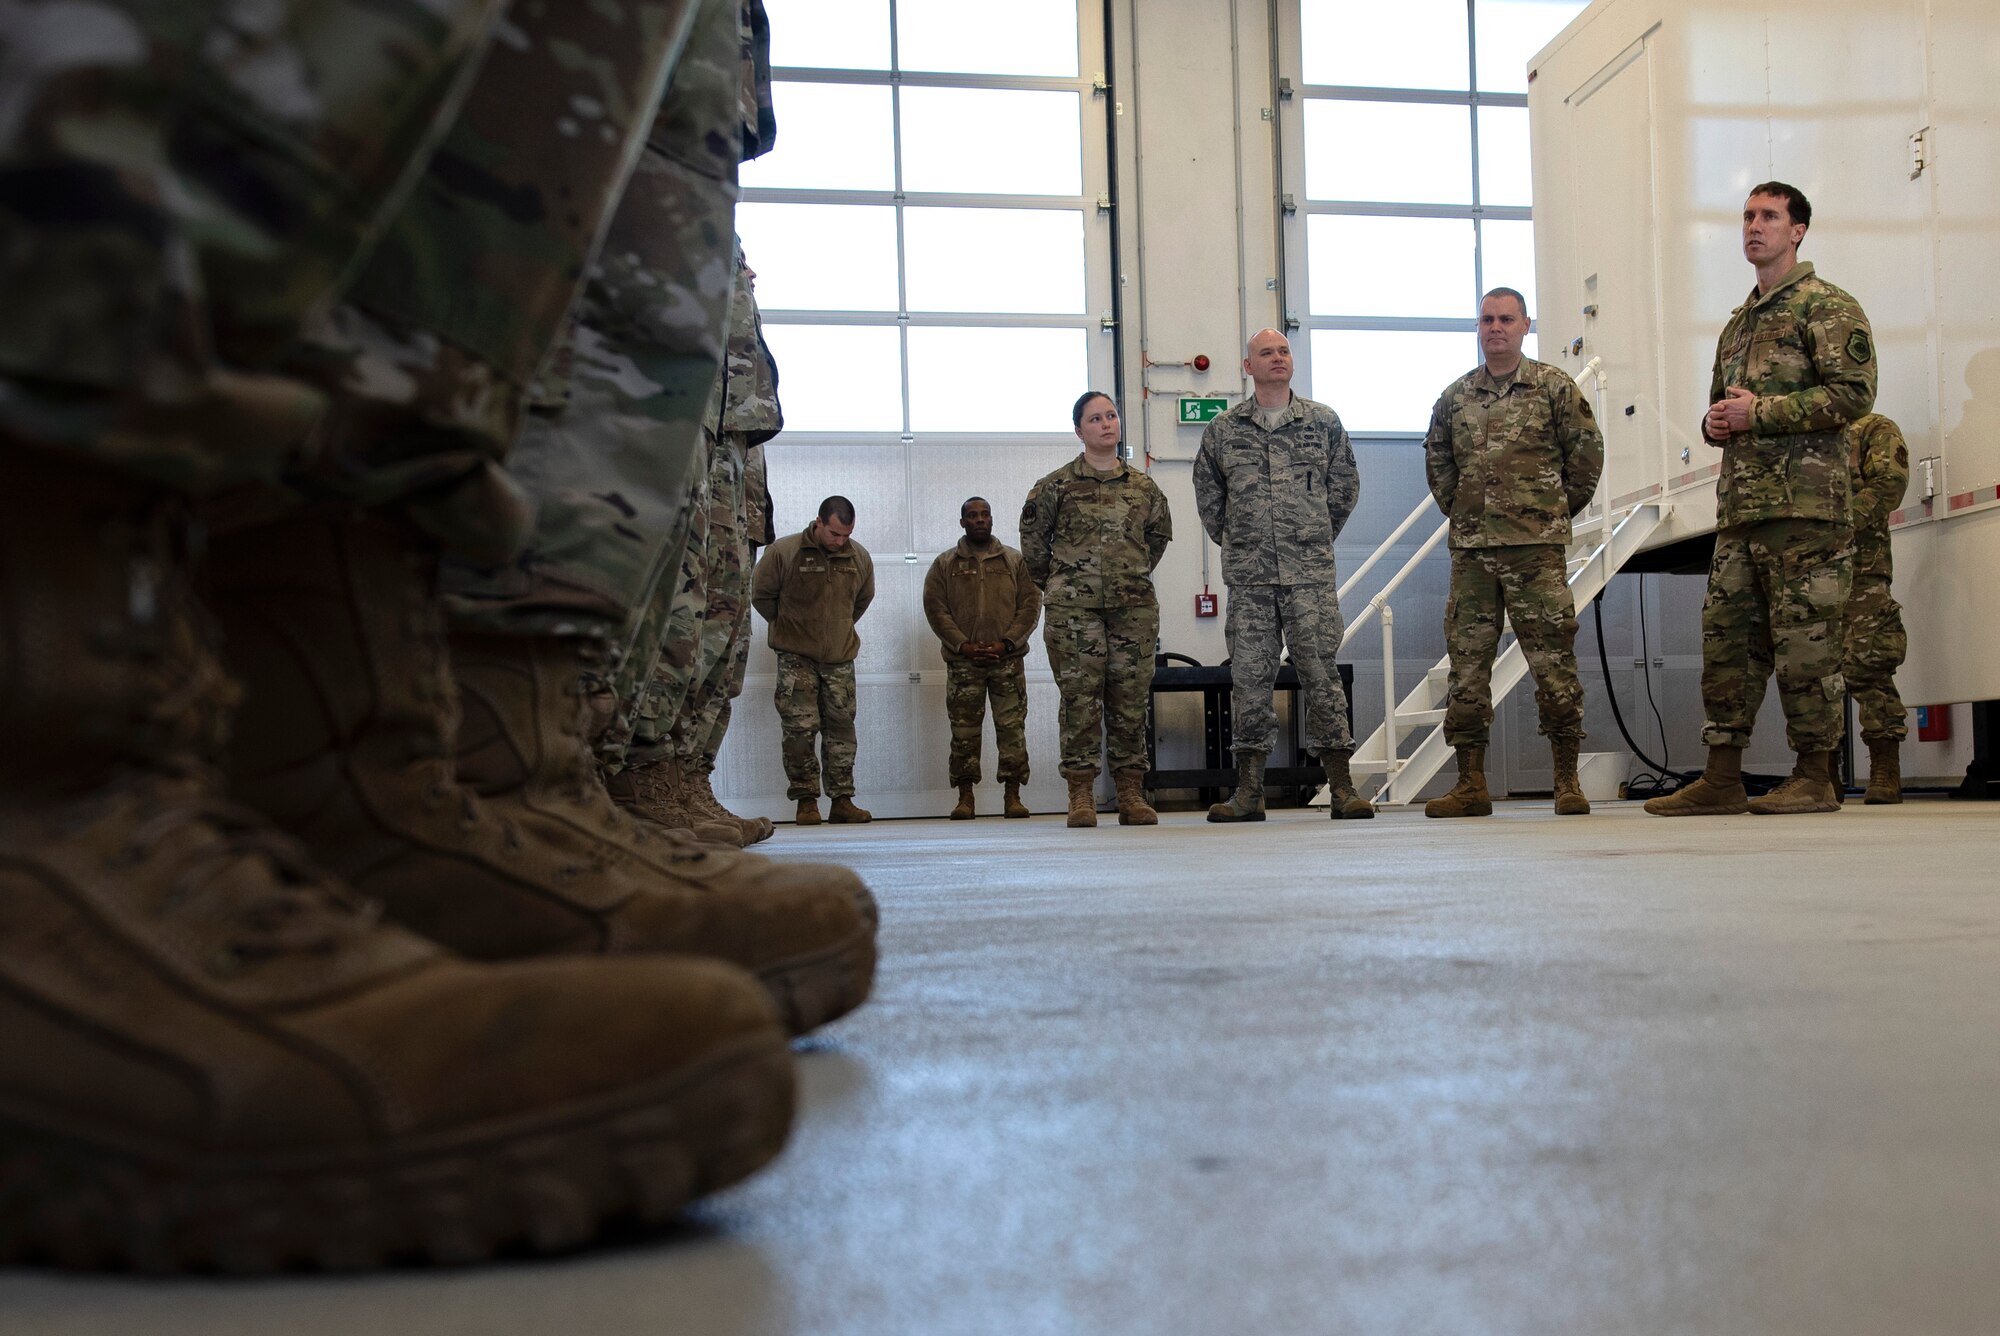 U.S. Air Force Col. David Epperson, 52nd Fighter Wing commander, right, speaks with Airmen from the 702nd Munitions Support Squadron at Buechel Air Base, Germany, Dec. 5, 2019. Epperson toured facilities around the geographically separated unit to gain a better understanding of the 702nd MUNSS's capabilities. (U.S. Air Force photo by Airman 1st Class Valerie Seelye)